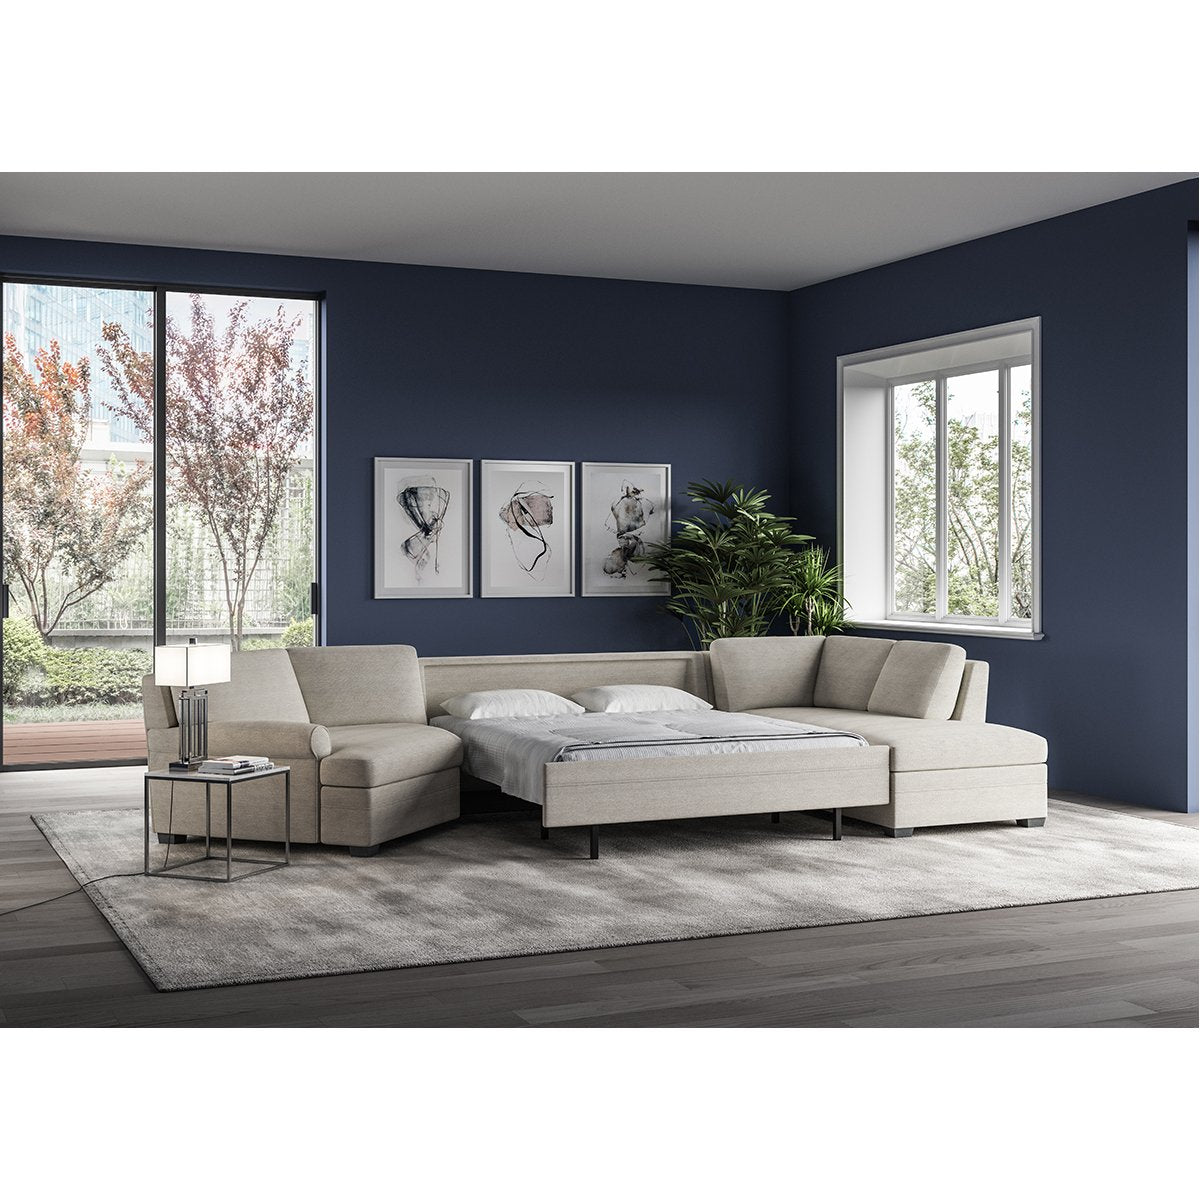 Gaines Upholstery Comfort Sleeper by American Leather